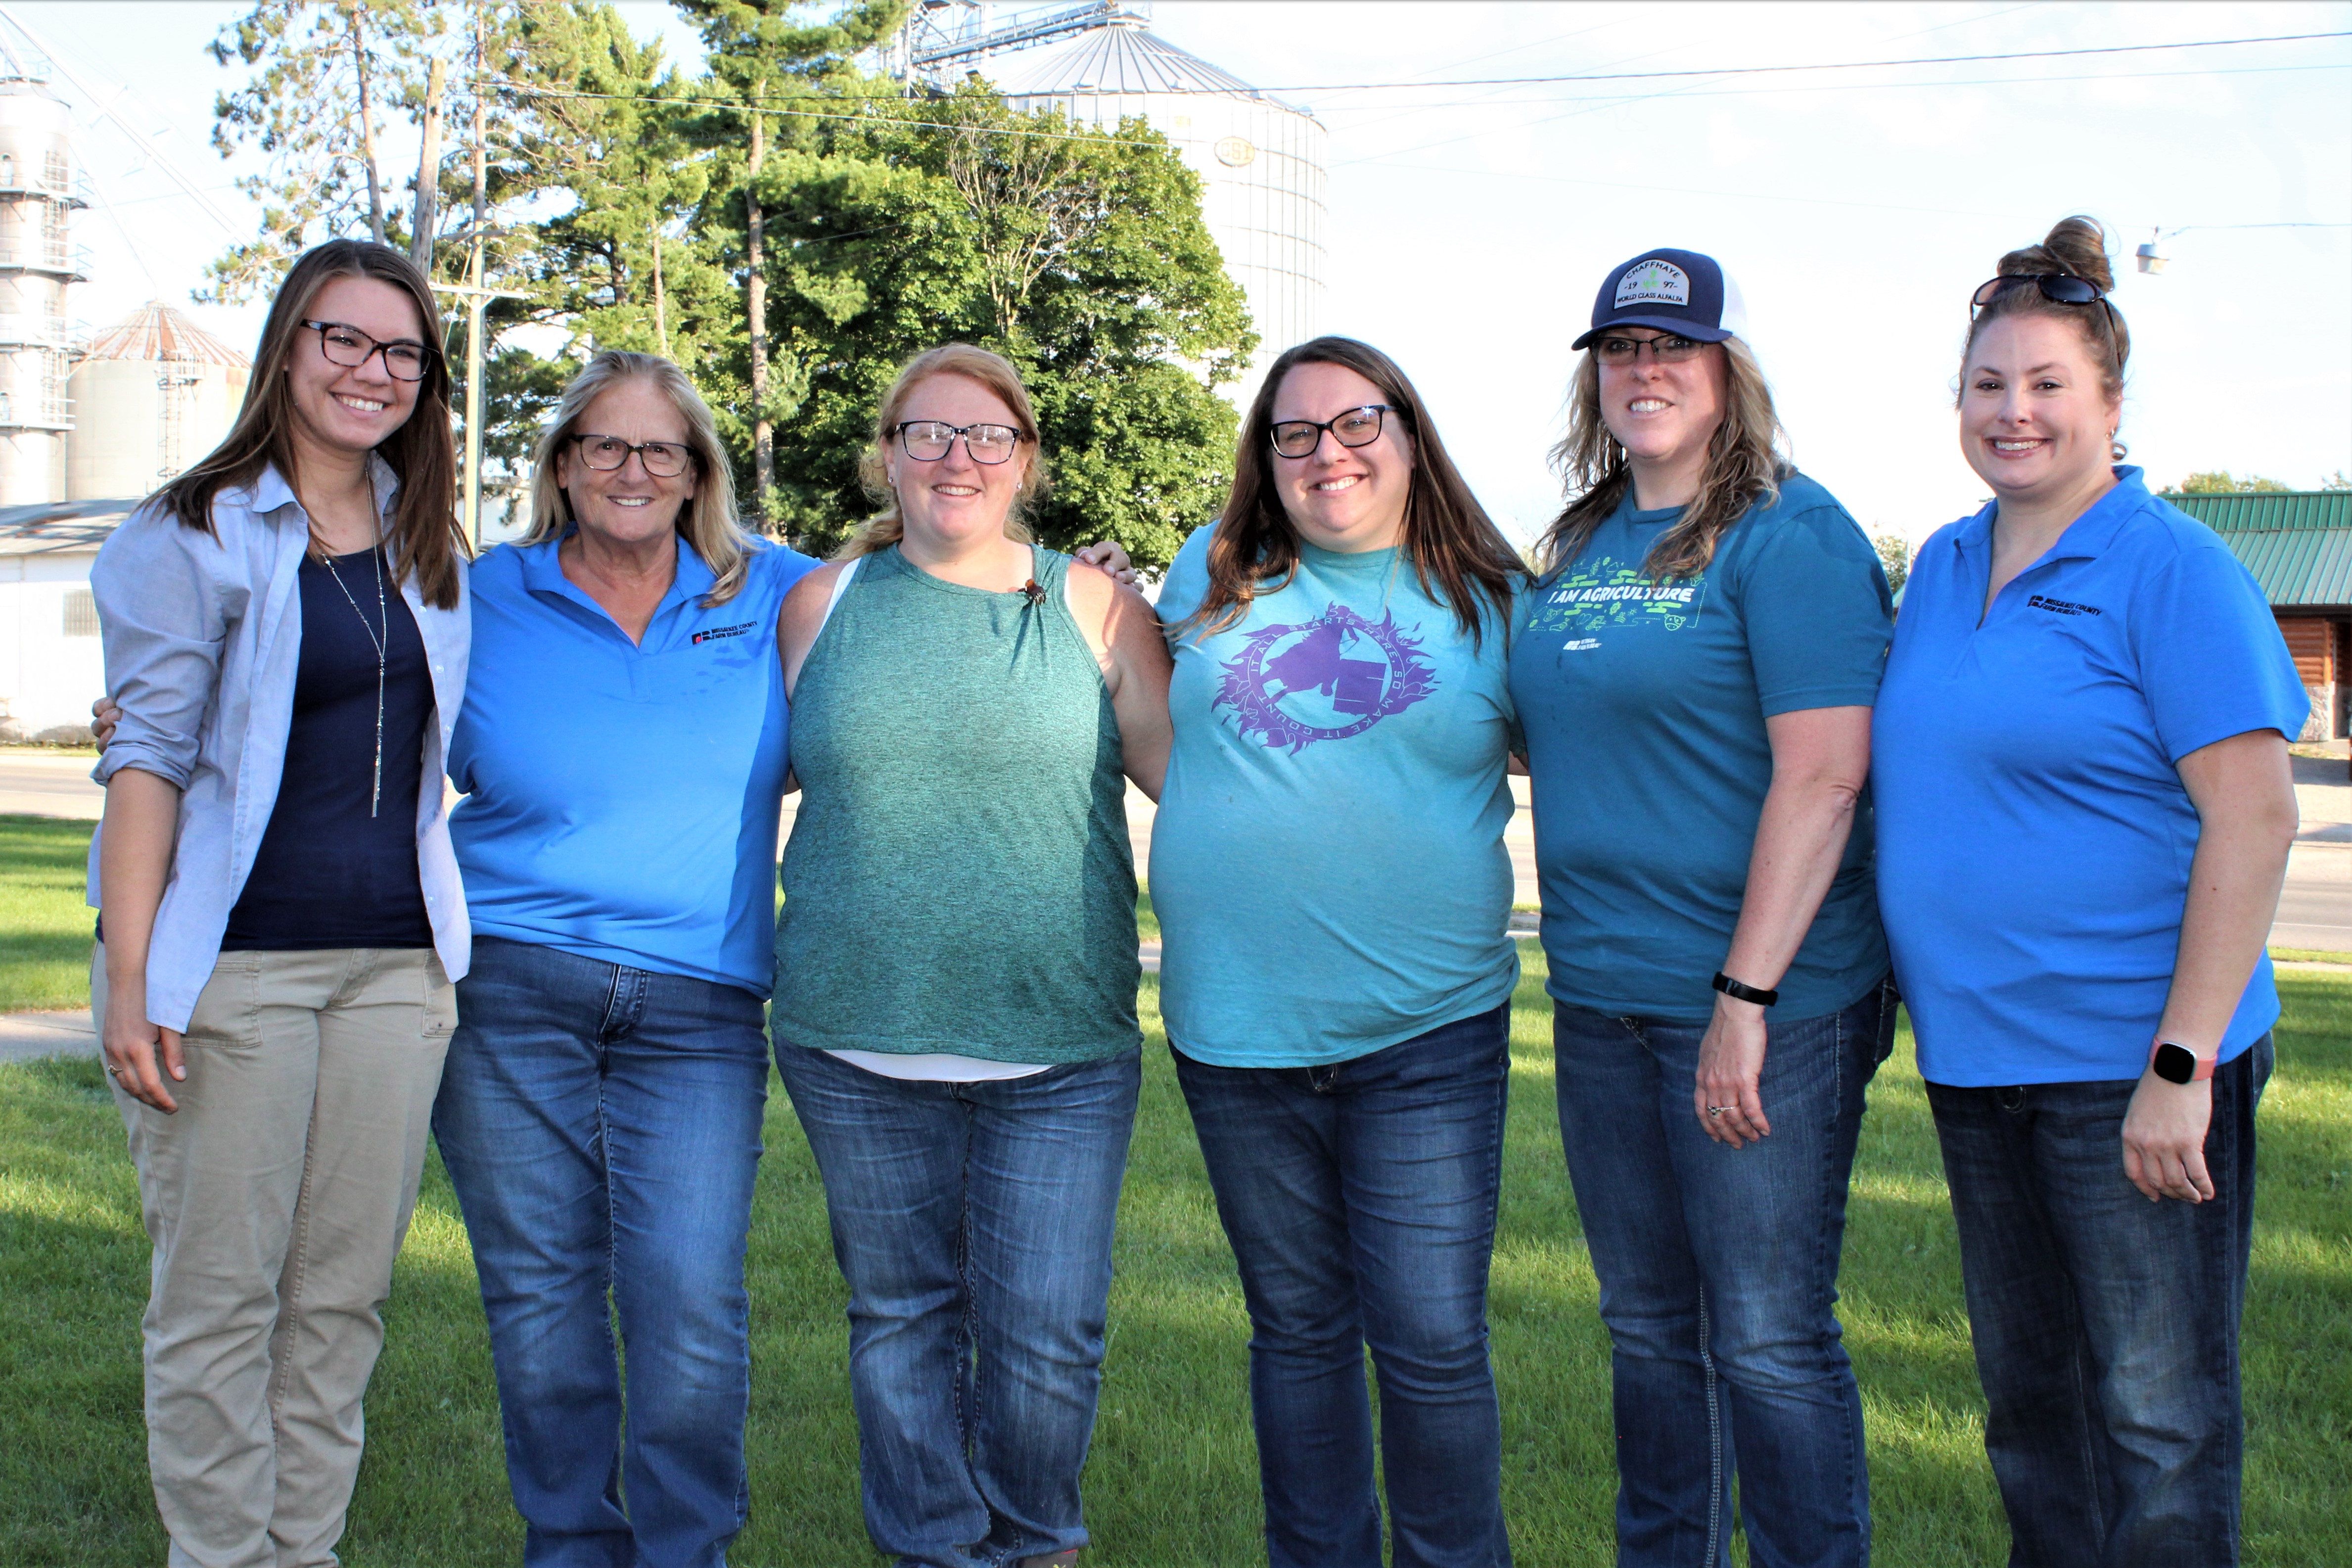 Missaukee County Farm Bureau’s movers and shakers (from left): MFB Regional Manager Nicole Jennings, Vice President and P&E Chair Ellen Vanderwal, Young Farmer Chair Chelsea Jones, Lonit Huston, President Jodi DeHate, Administrative Manager Katy Eggle. Not pictured: Jordan Smith.